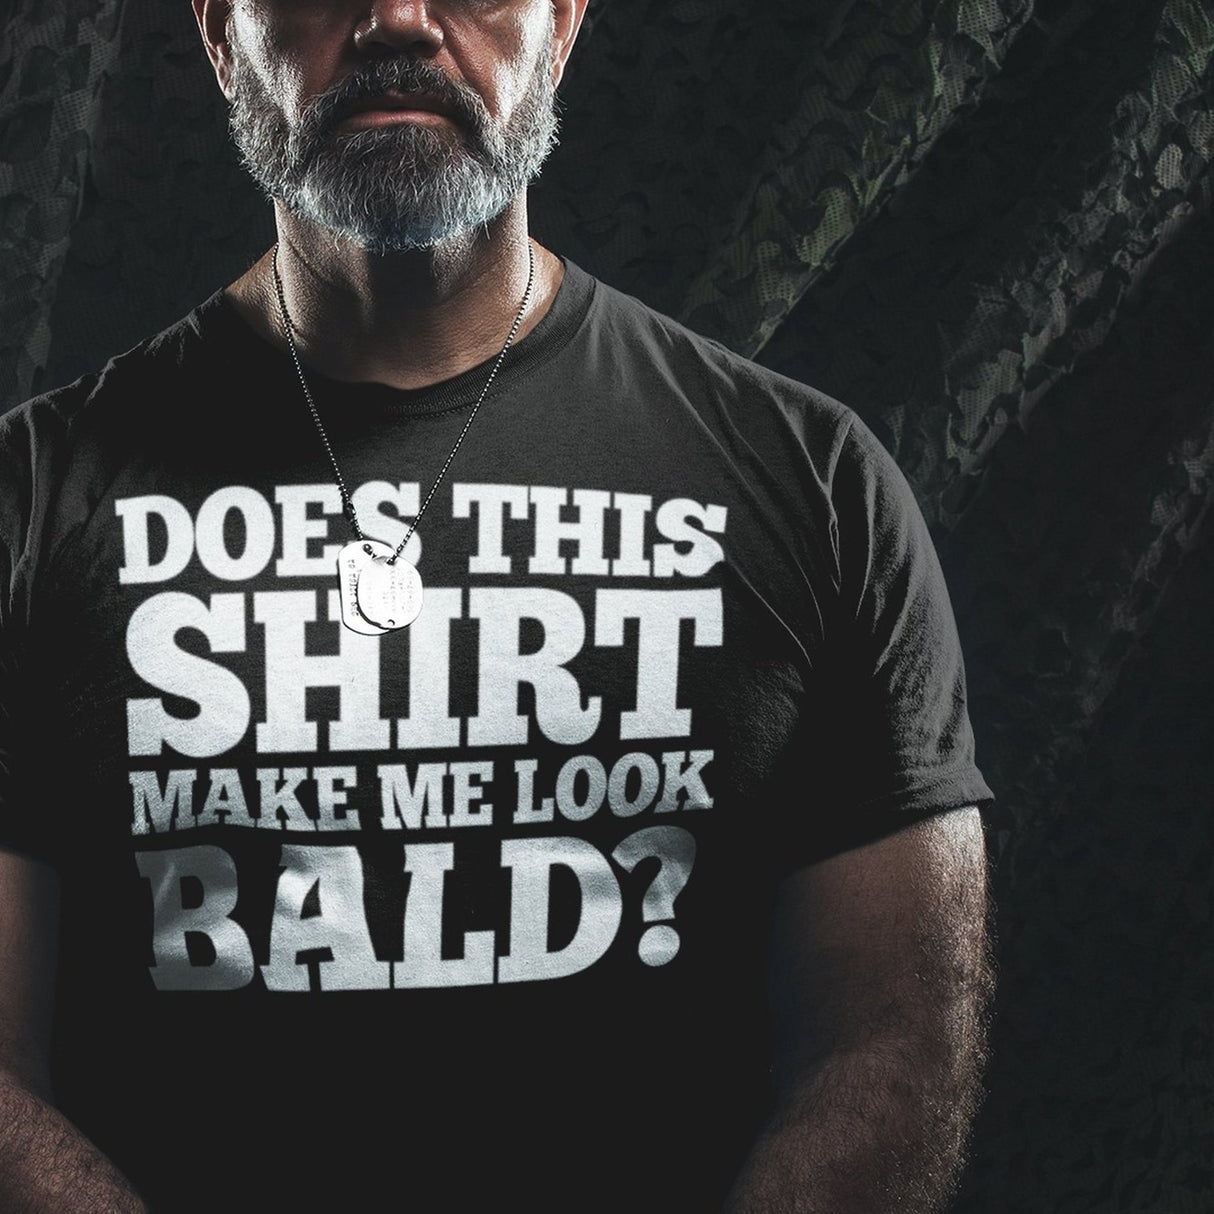 does-this-shirt-make-me-look-bald-dad-tee-father-t-shirt-bald-tee-t-shirt-tee#color_black